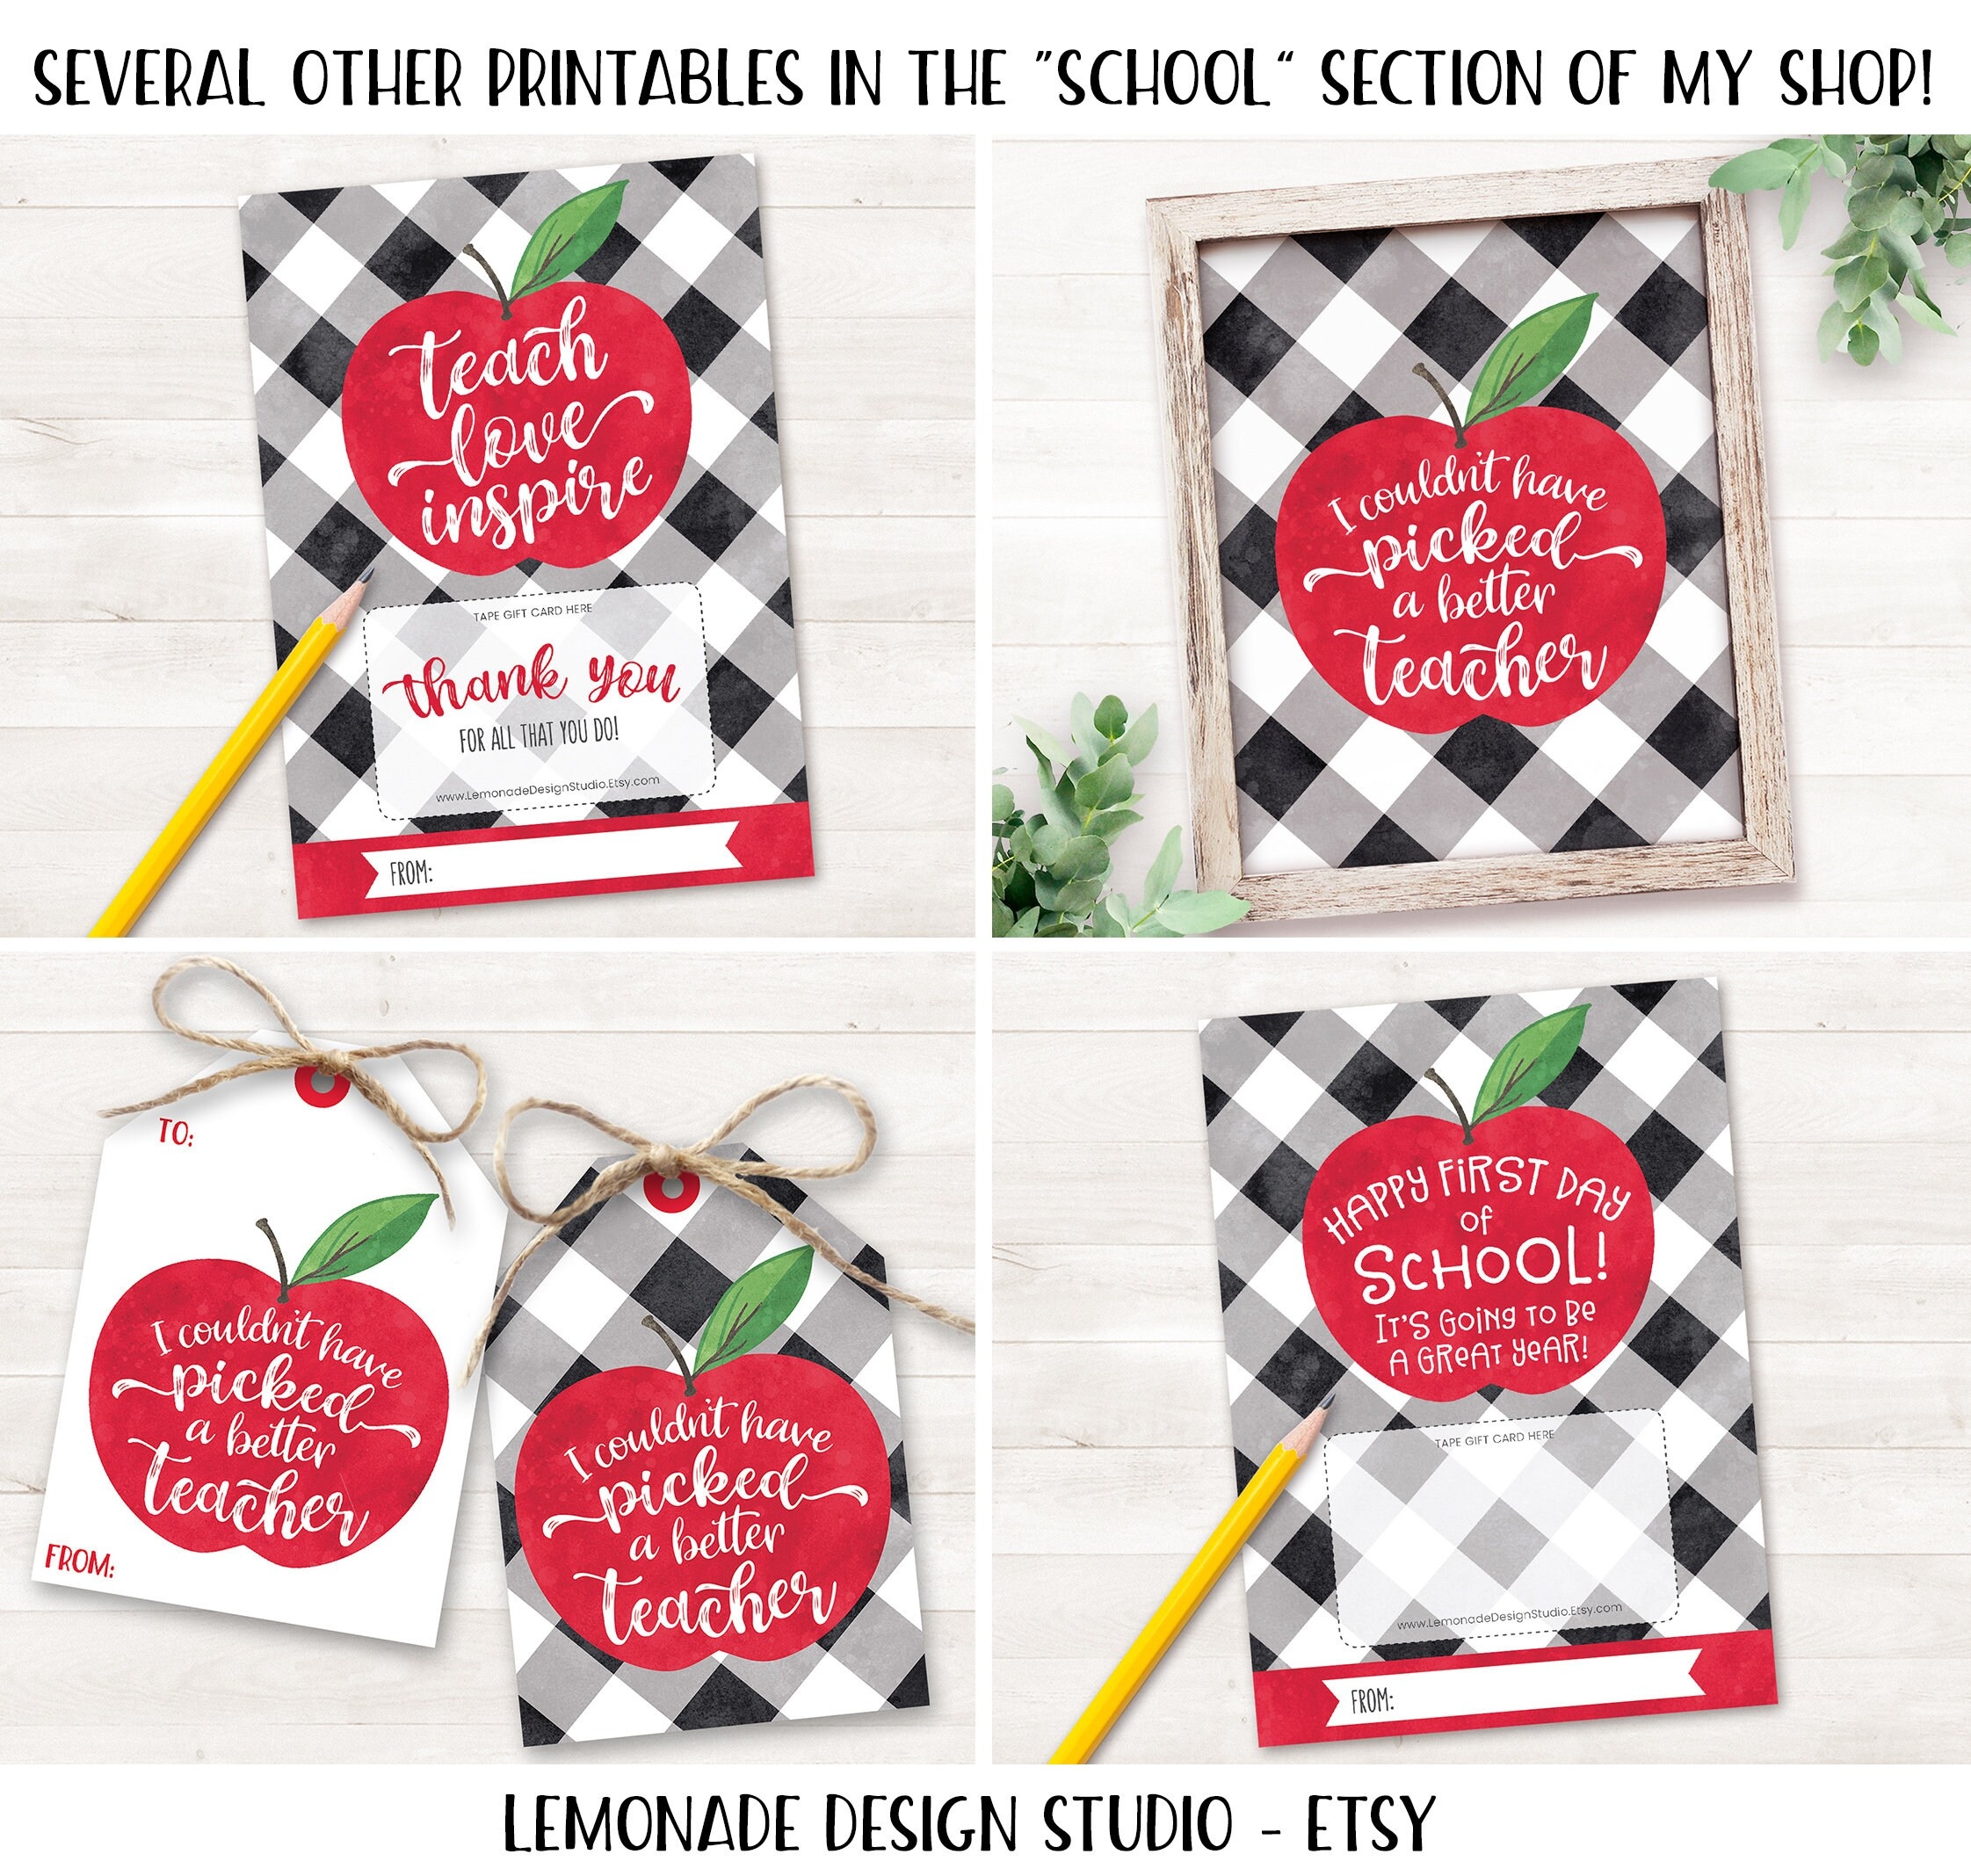 I Couldn'T Have Picked A Better Teacher Free Printable